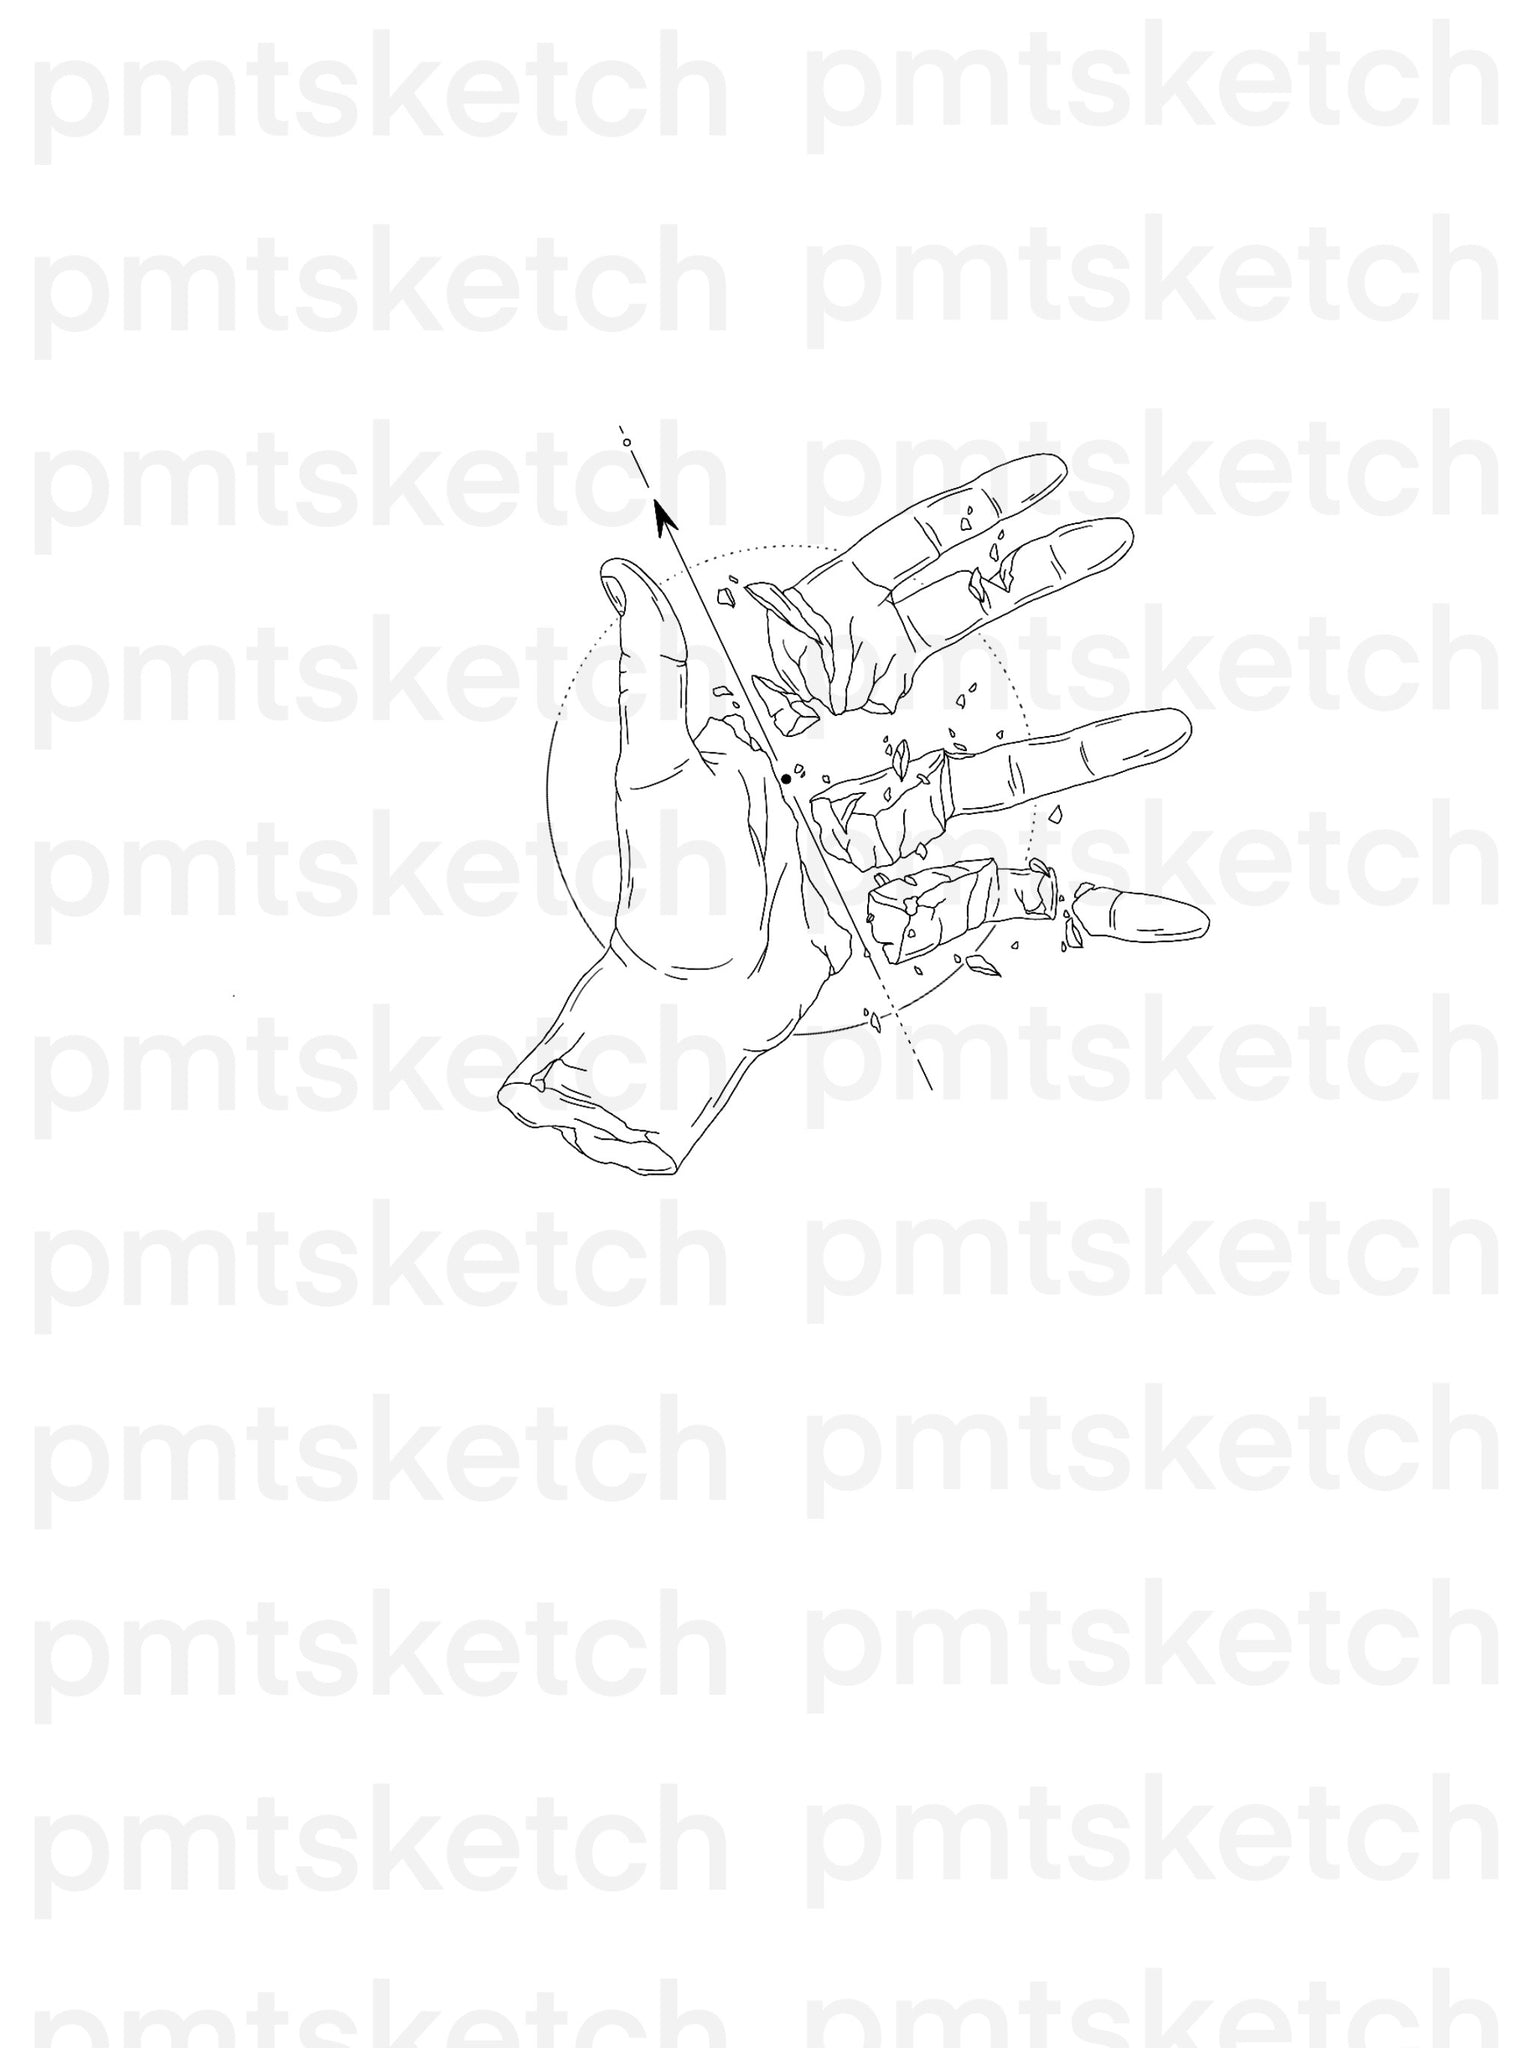 Abstract Hand Breaking